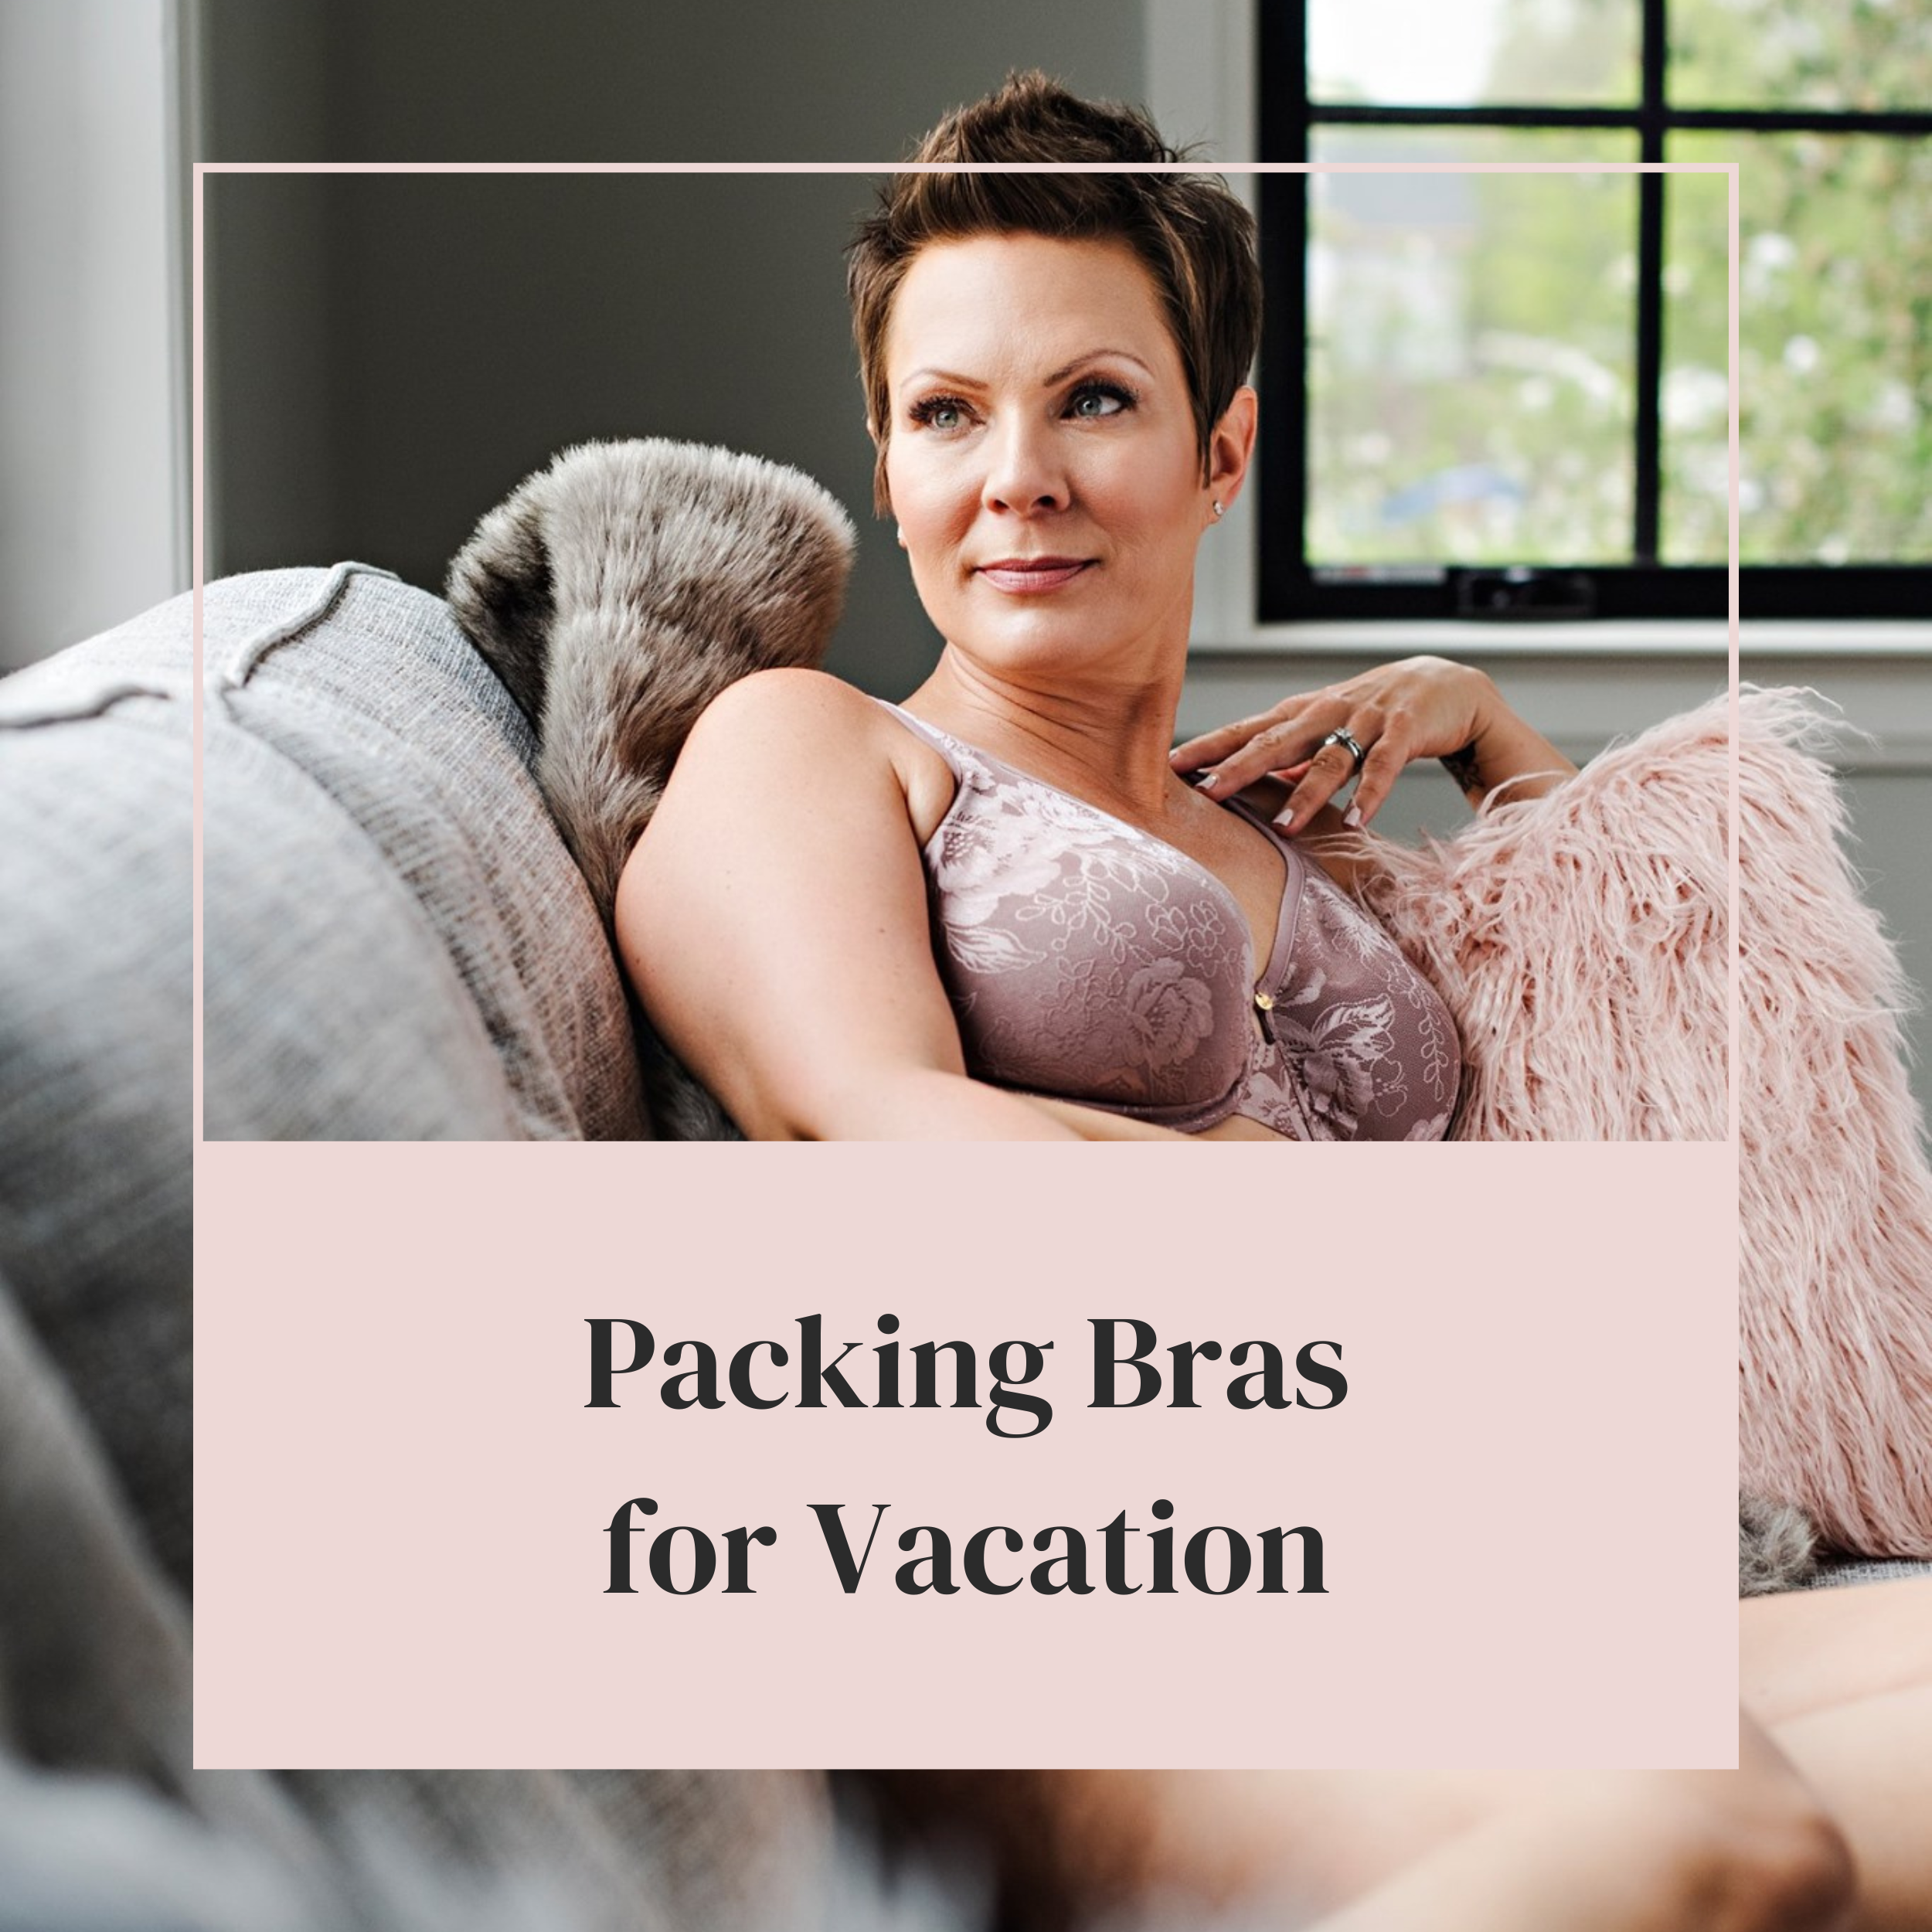 Top Tips & Tricks for Packing Bras